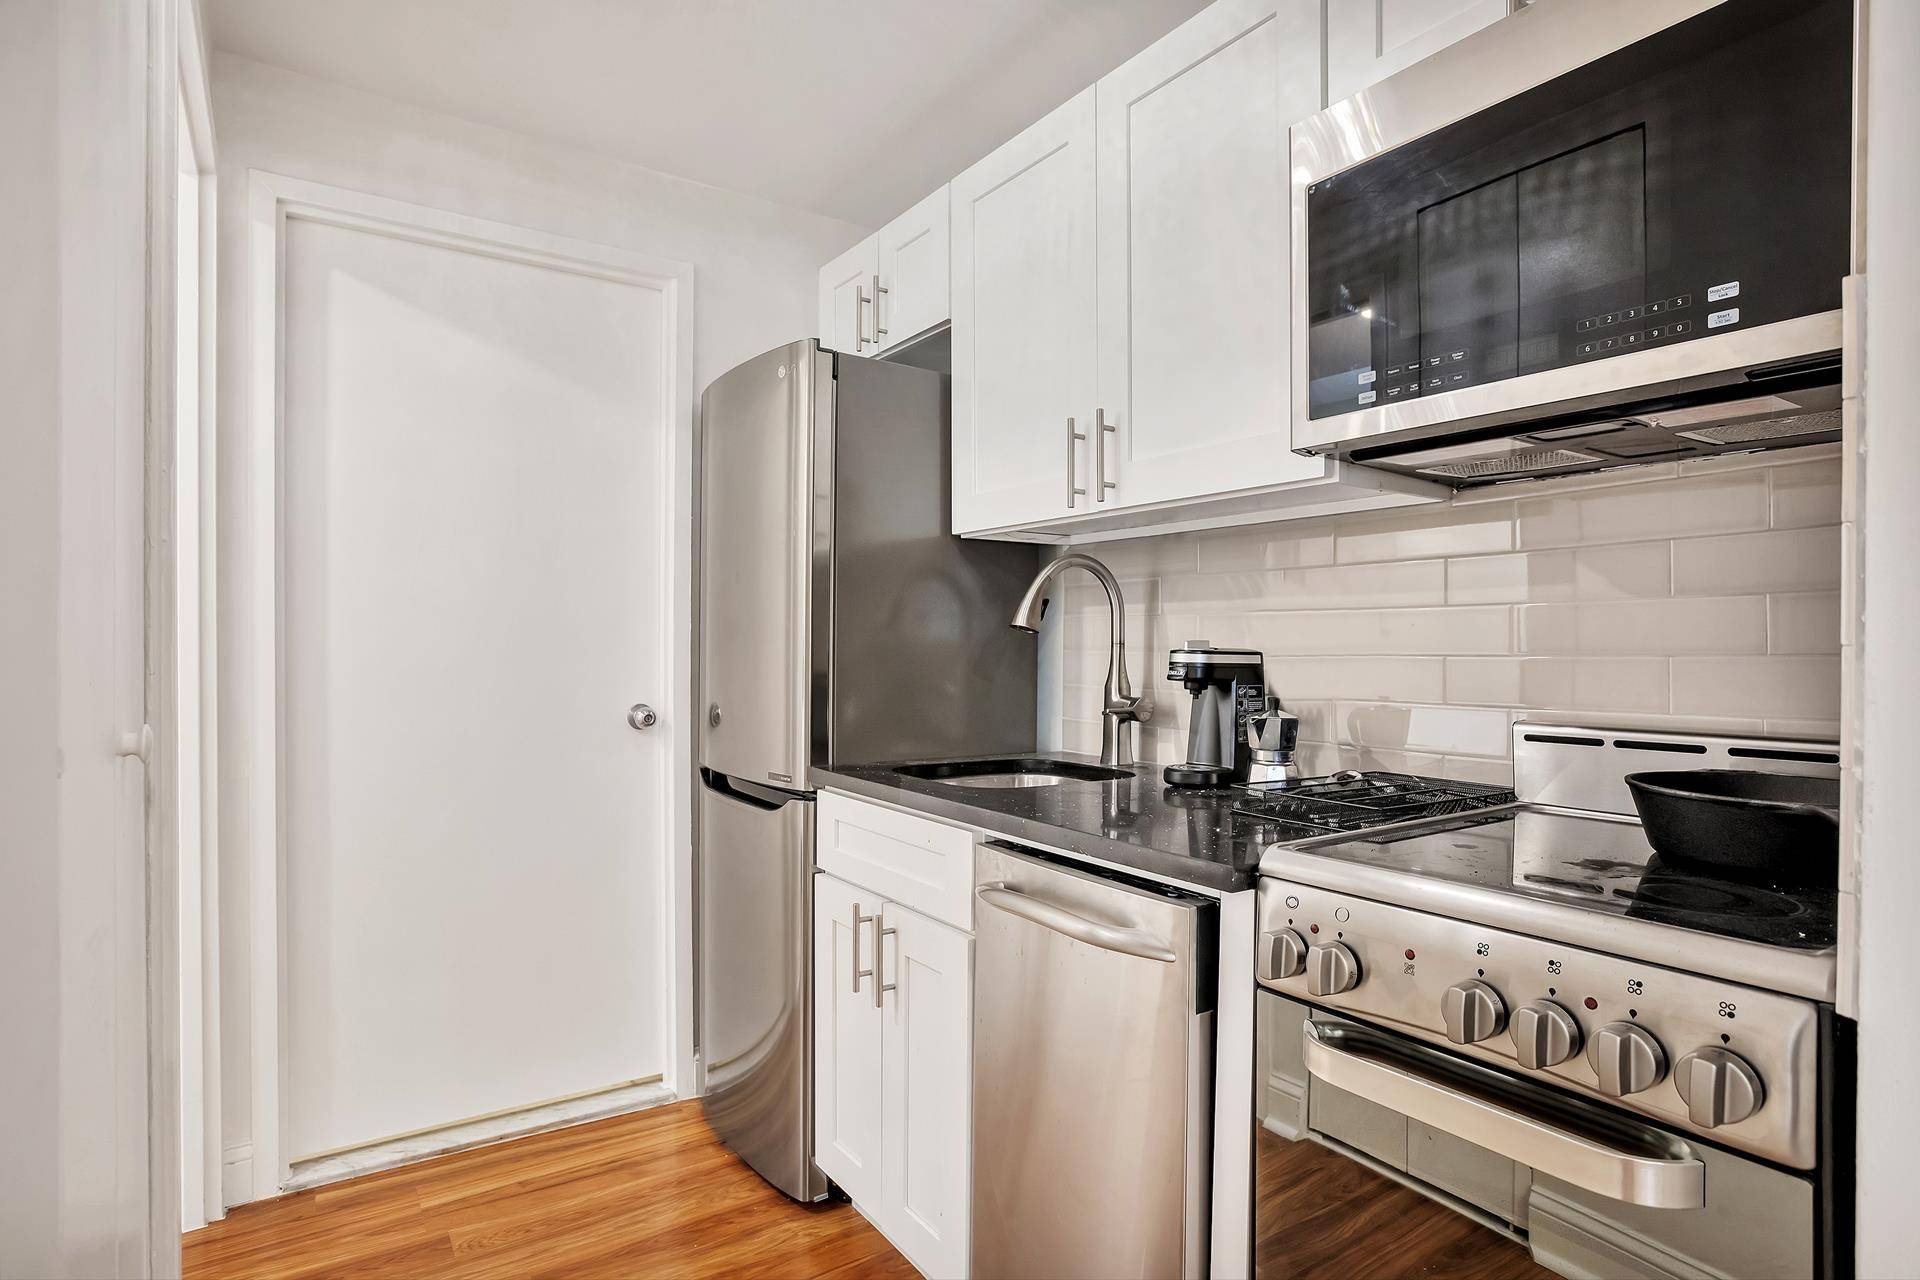 HUGE PRICE REDUCTION ! THE BEST CONDO VALUE IN MIDTOWN WITH SUPER LOW MONTHLIES makes this home the perfect Pied A Terre or Investment property !